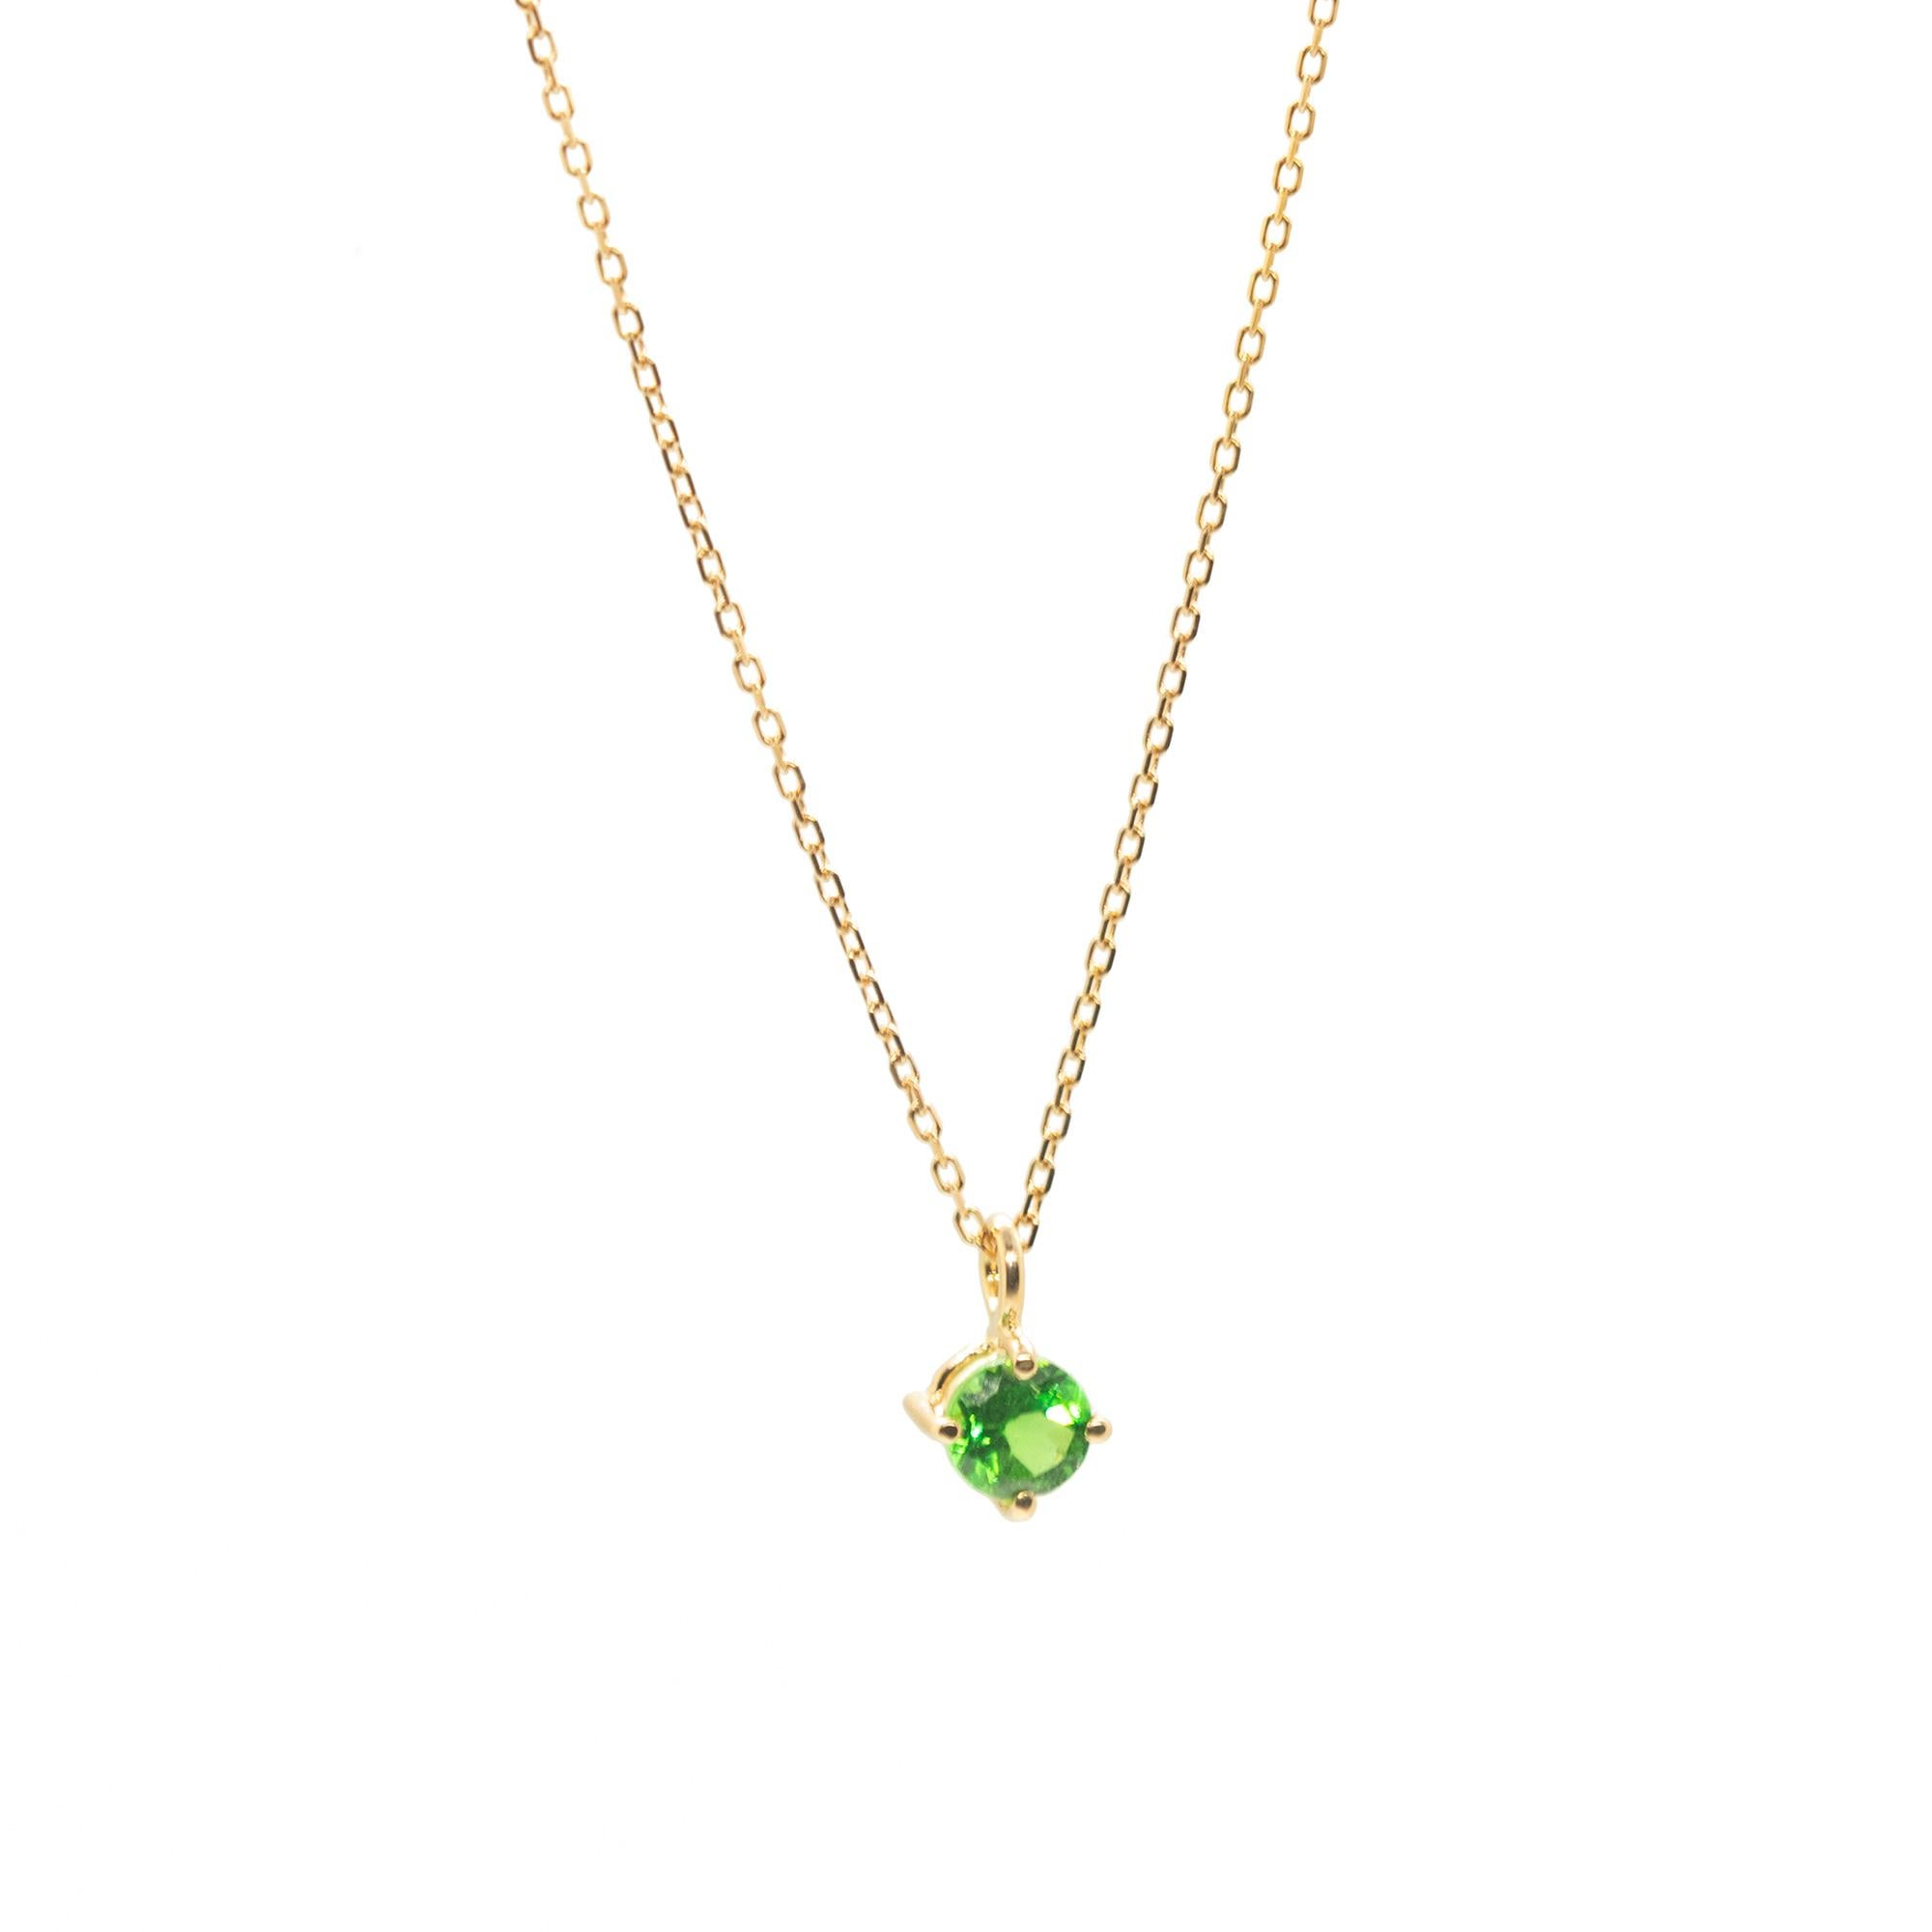 Minimalist 18 karat white gold necklace with a beautiful Green Tsavorite  of 0.35 carats.  The perfect handmade jewellery for an unforgettable cocktail night.

• 18 Karat pink Gold
• Natural Green Tsavorite 0.35 carats
• Total length 42 cm
• Total